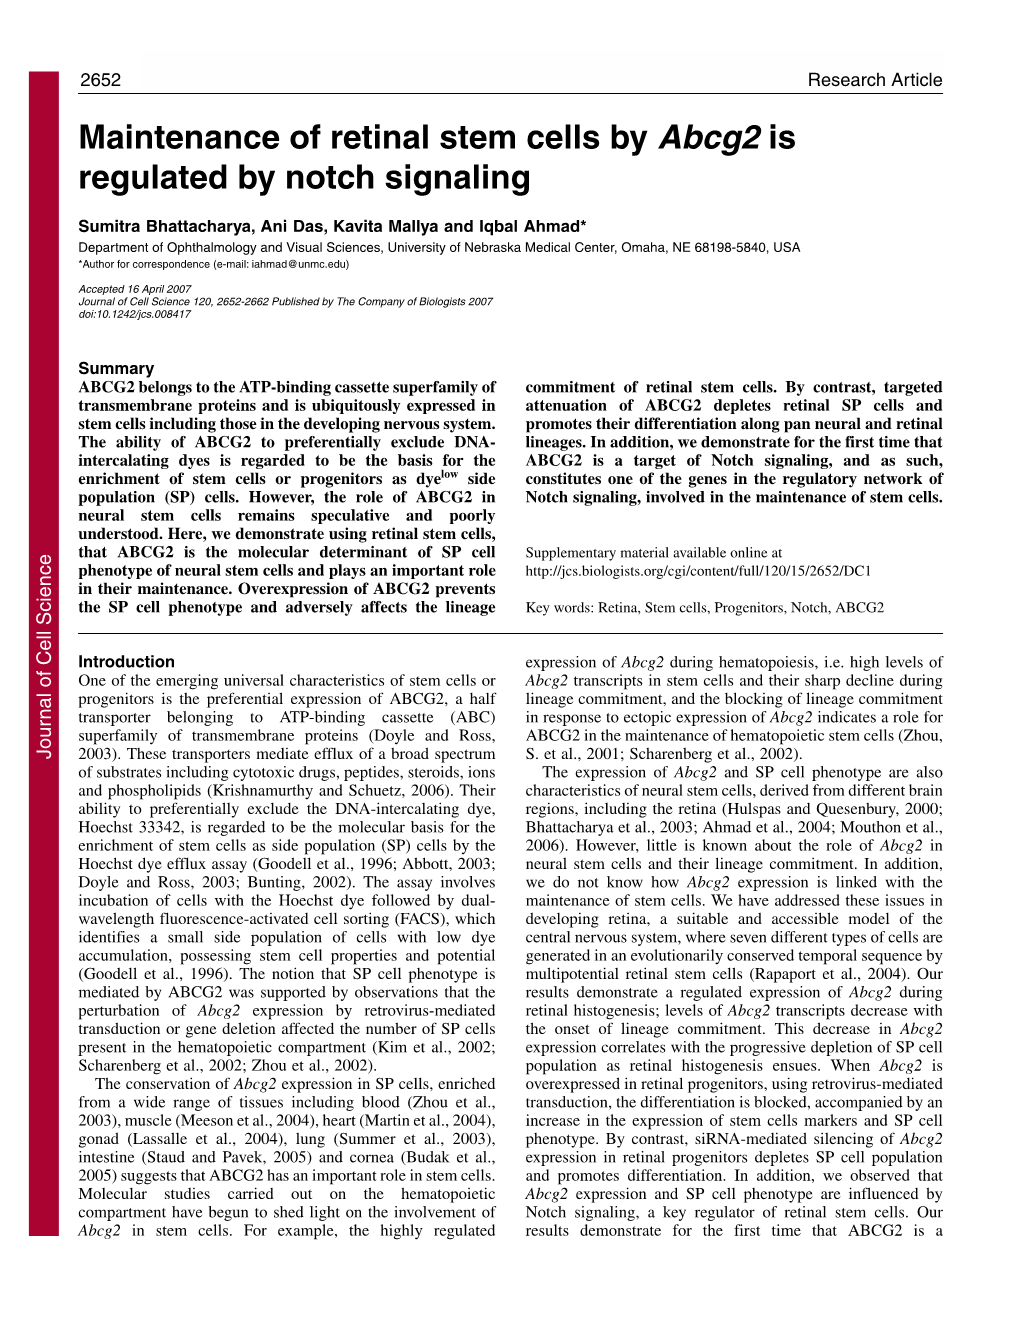 Maintenance of Retinal Stem Cells by Abcg2 Is Regulated by Notch Signaling